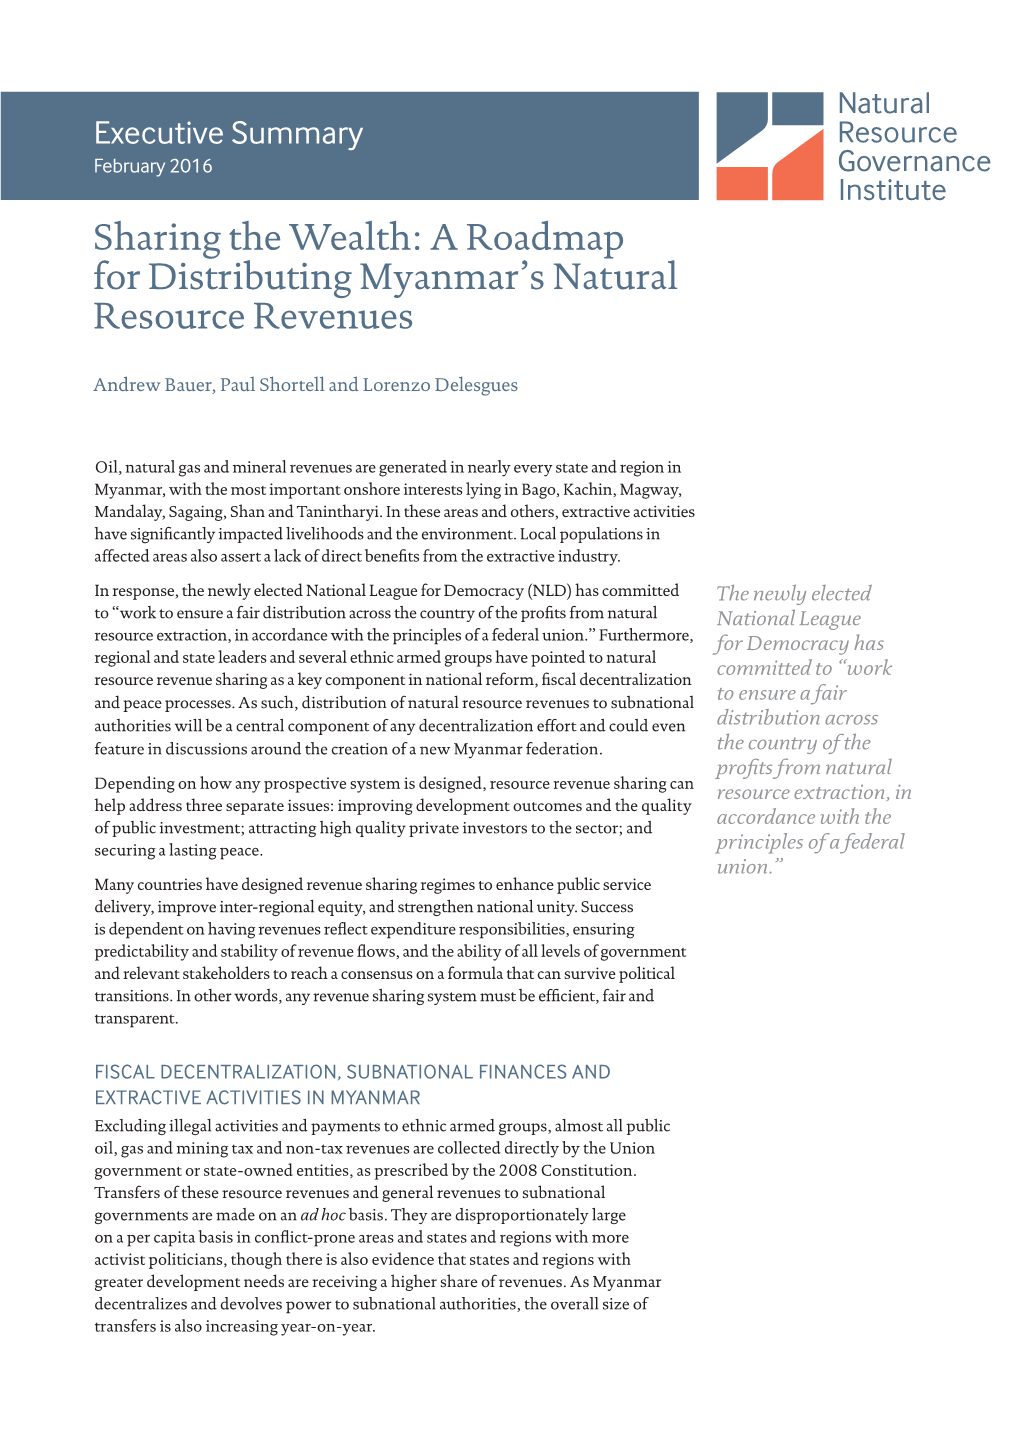 Sharing the Wealth: a Roadmap for Distributing Myanmar's Natural